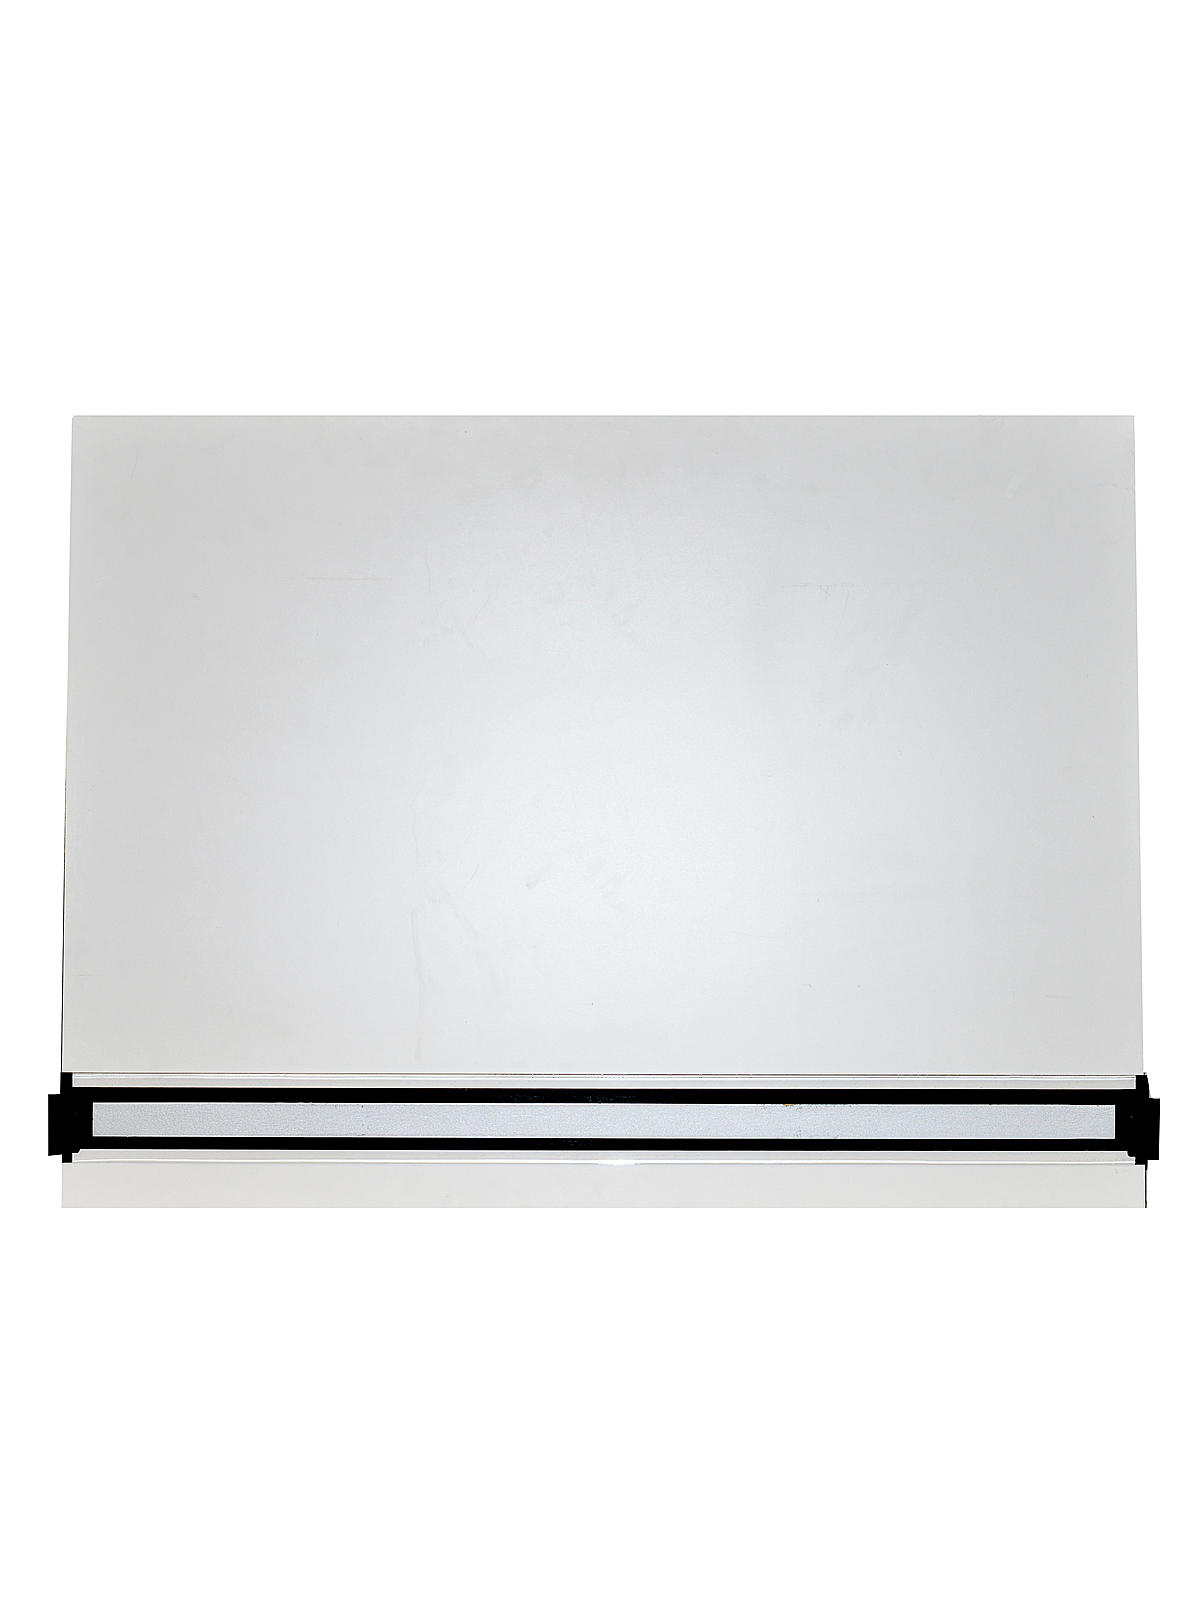 Drawing Board With Parallel Bar 24 In. X 36 In.